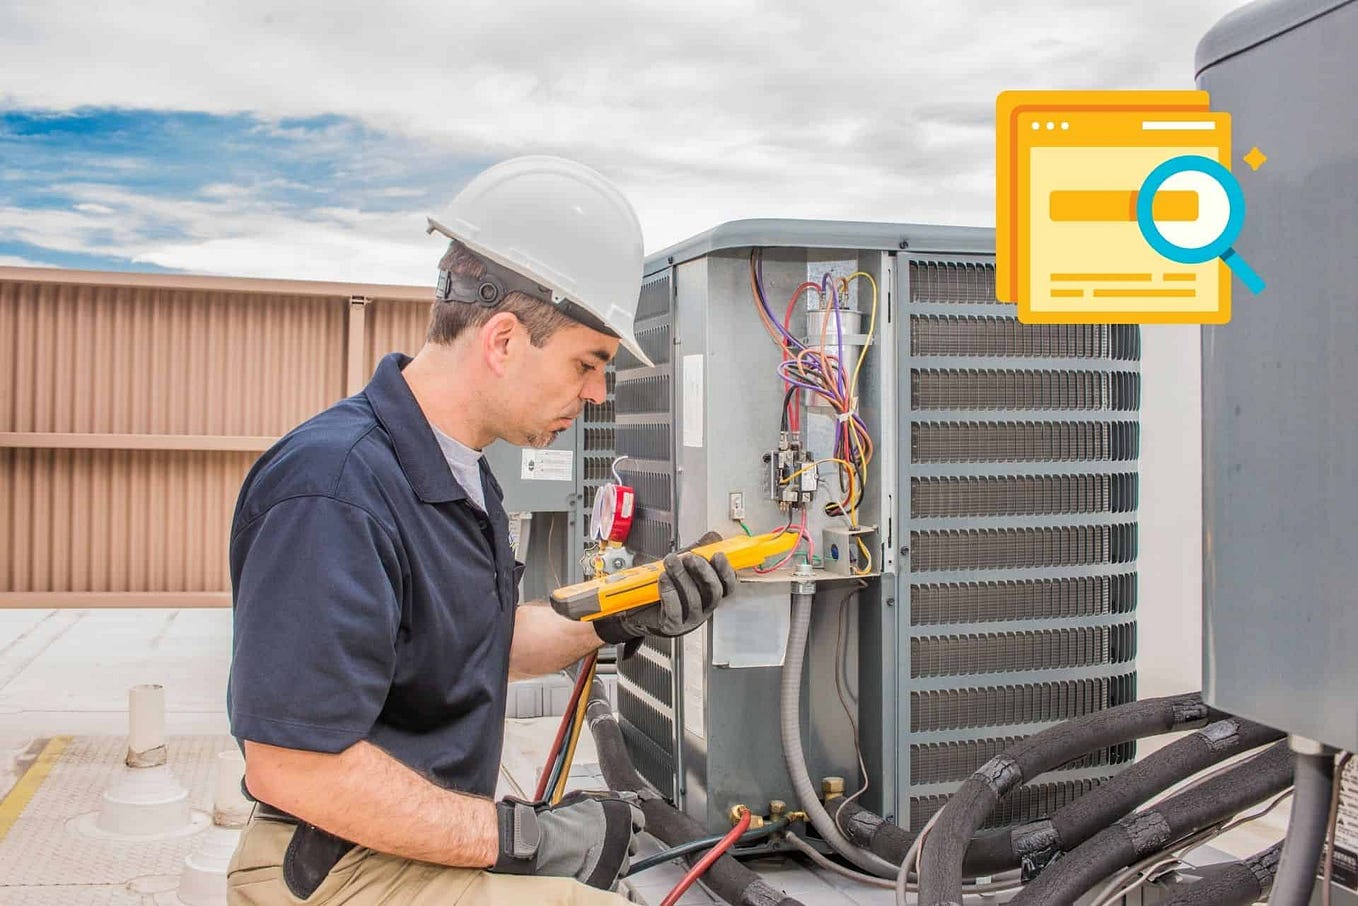 An HVAC technician working on a residential air conditioner.